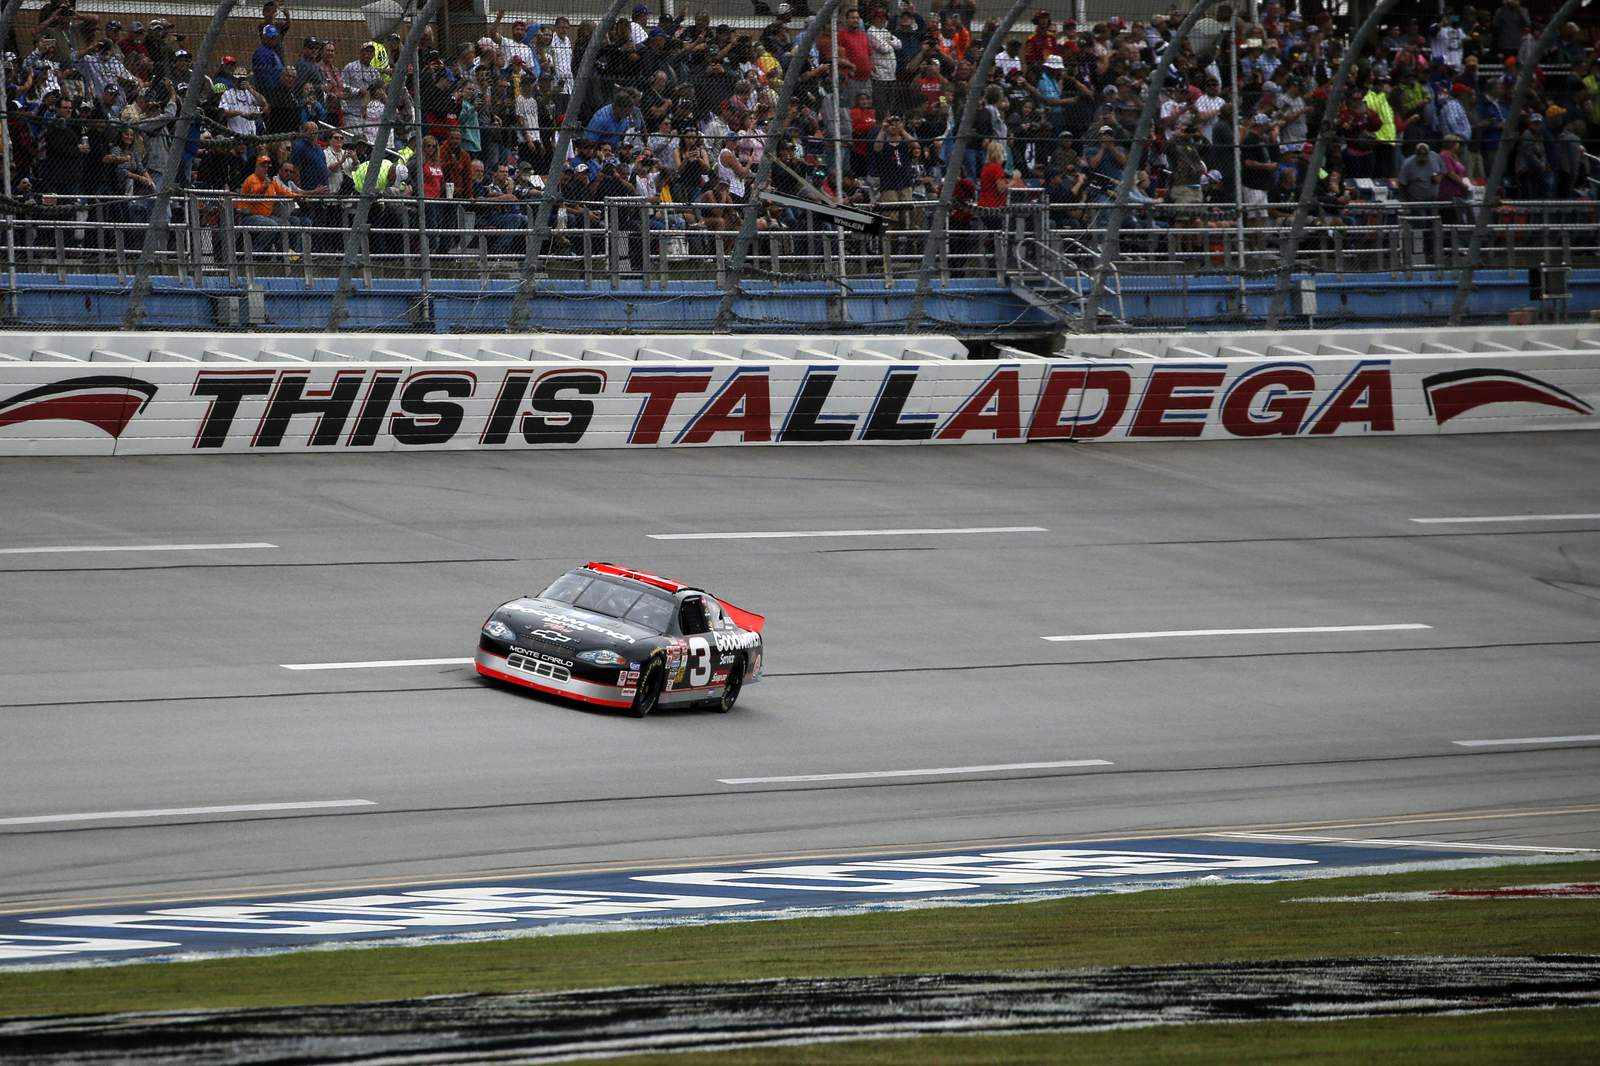 NASCAR has new rules, new feuds and more fans at Talladega